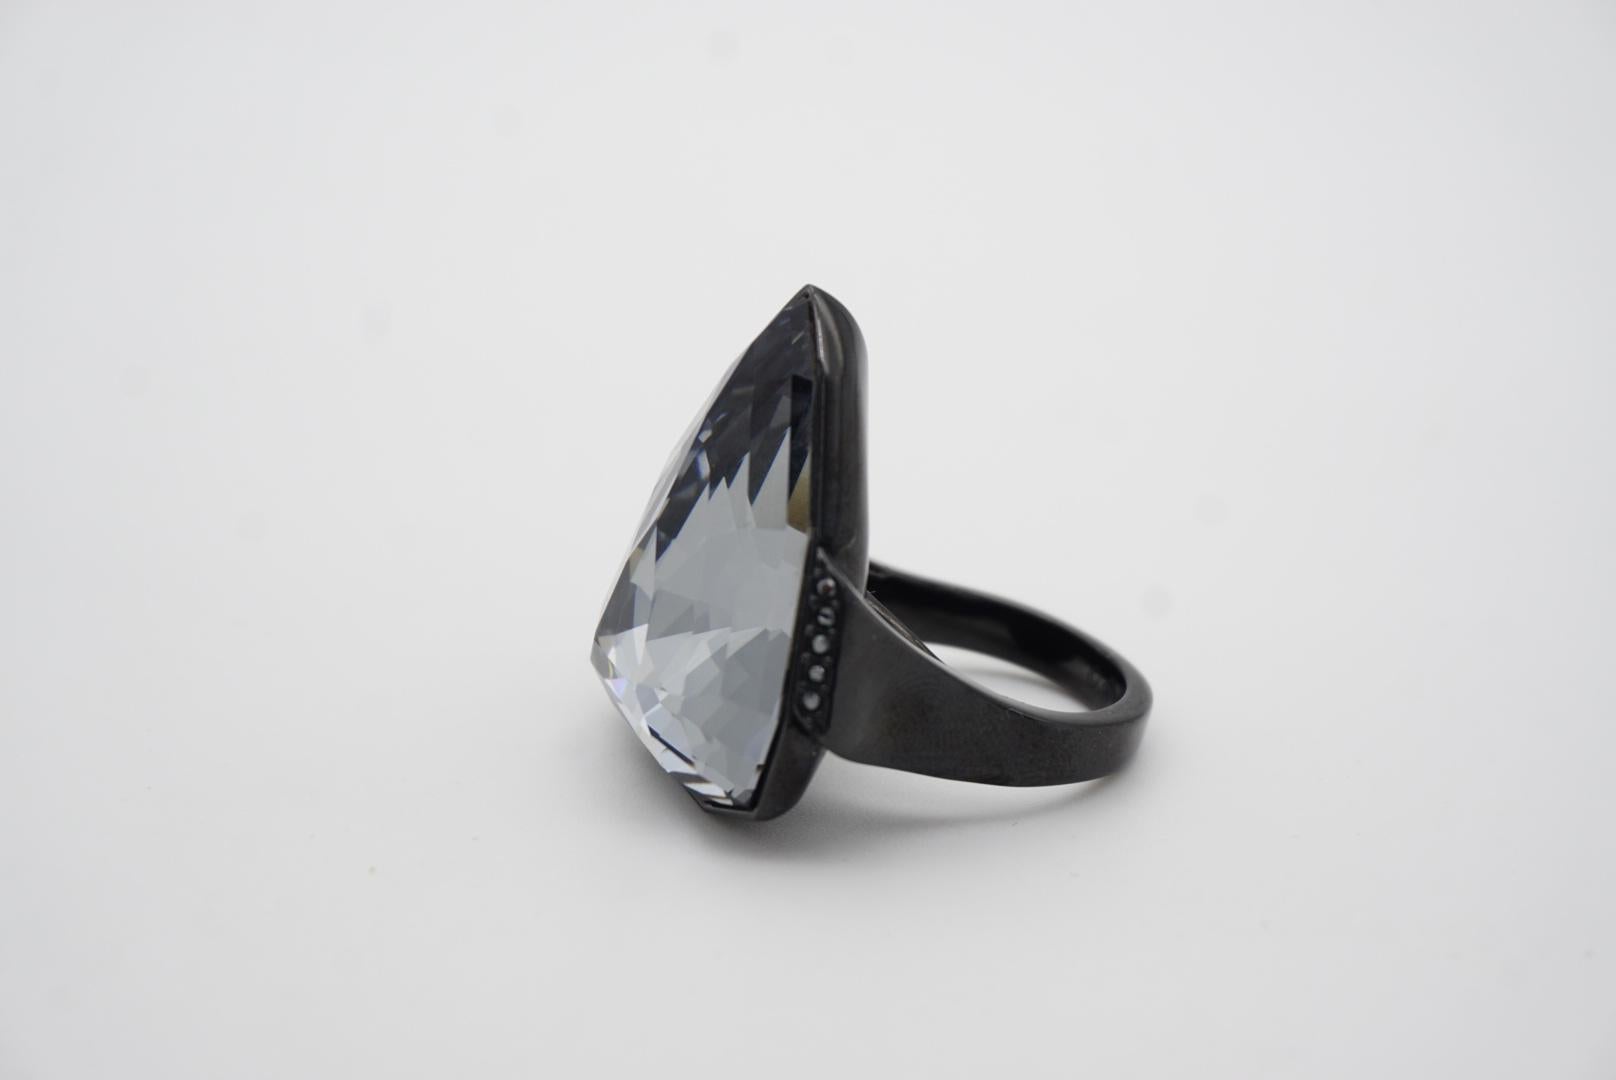 Swarovski Nirvana Triangle Crystals Black Curiosa Cocktail Ring, Size 55, UK N In Excellent Condition In Wokingham, England